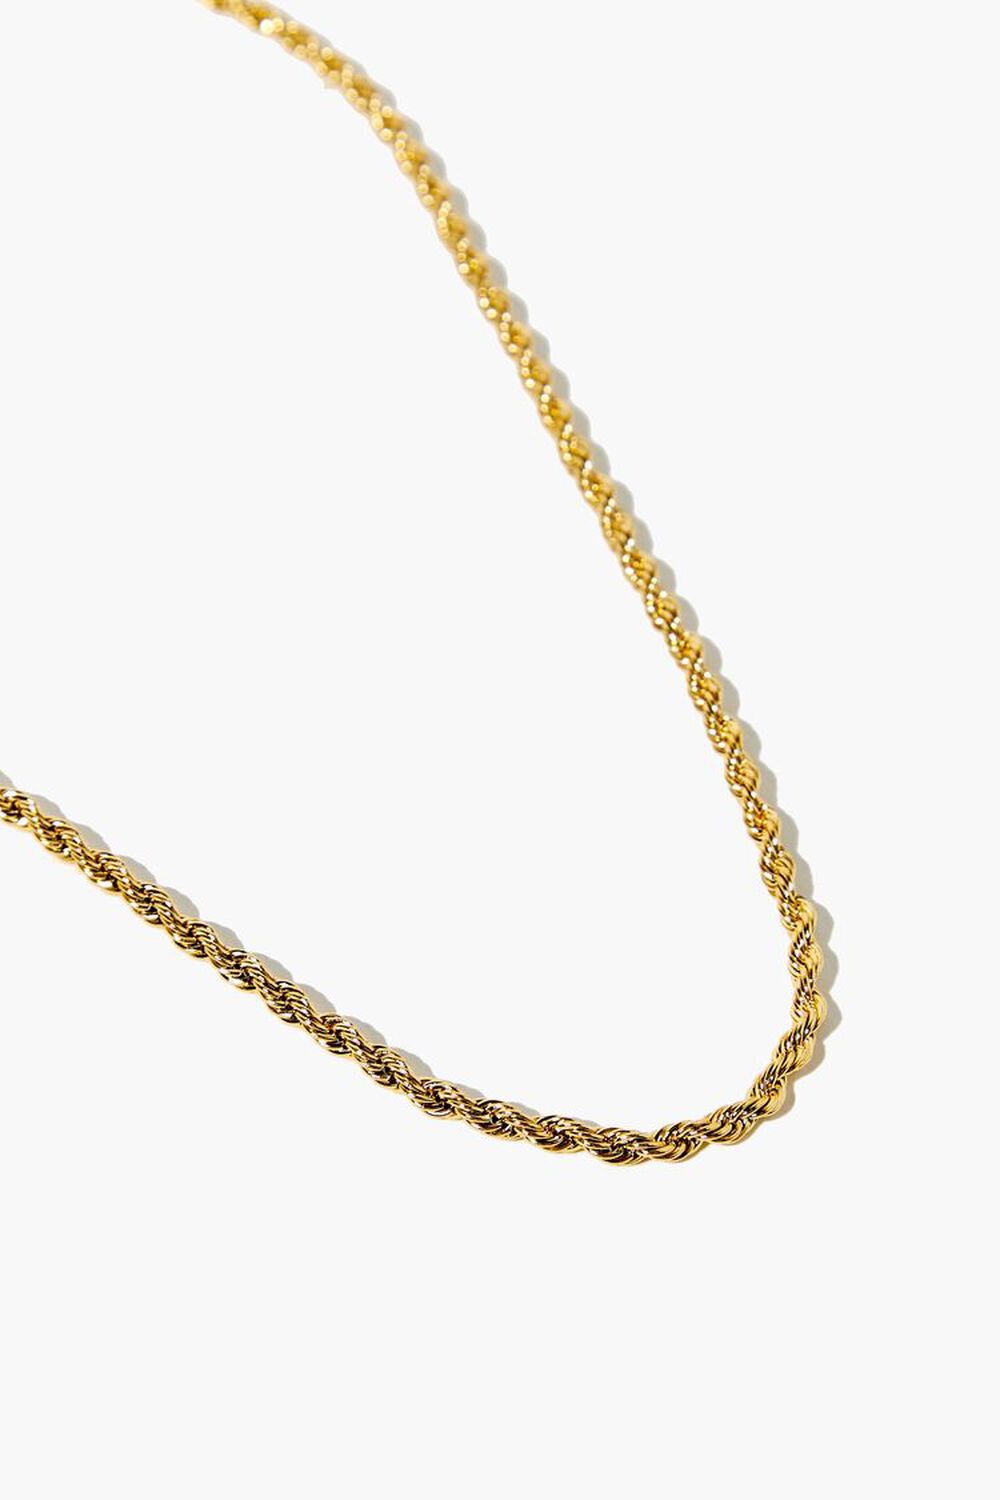 GOLD Men Rope Chain Necklace, image 1